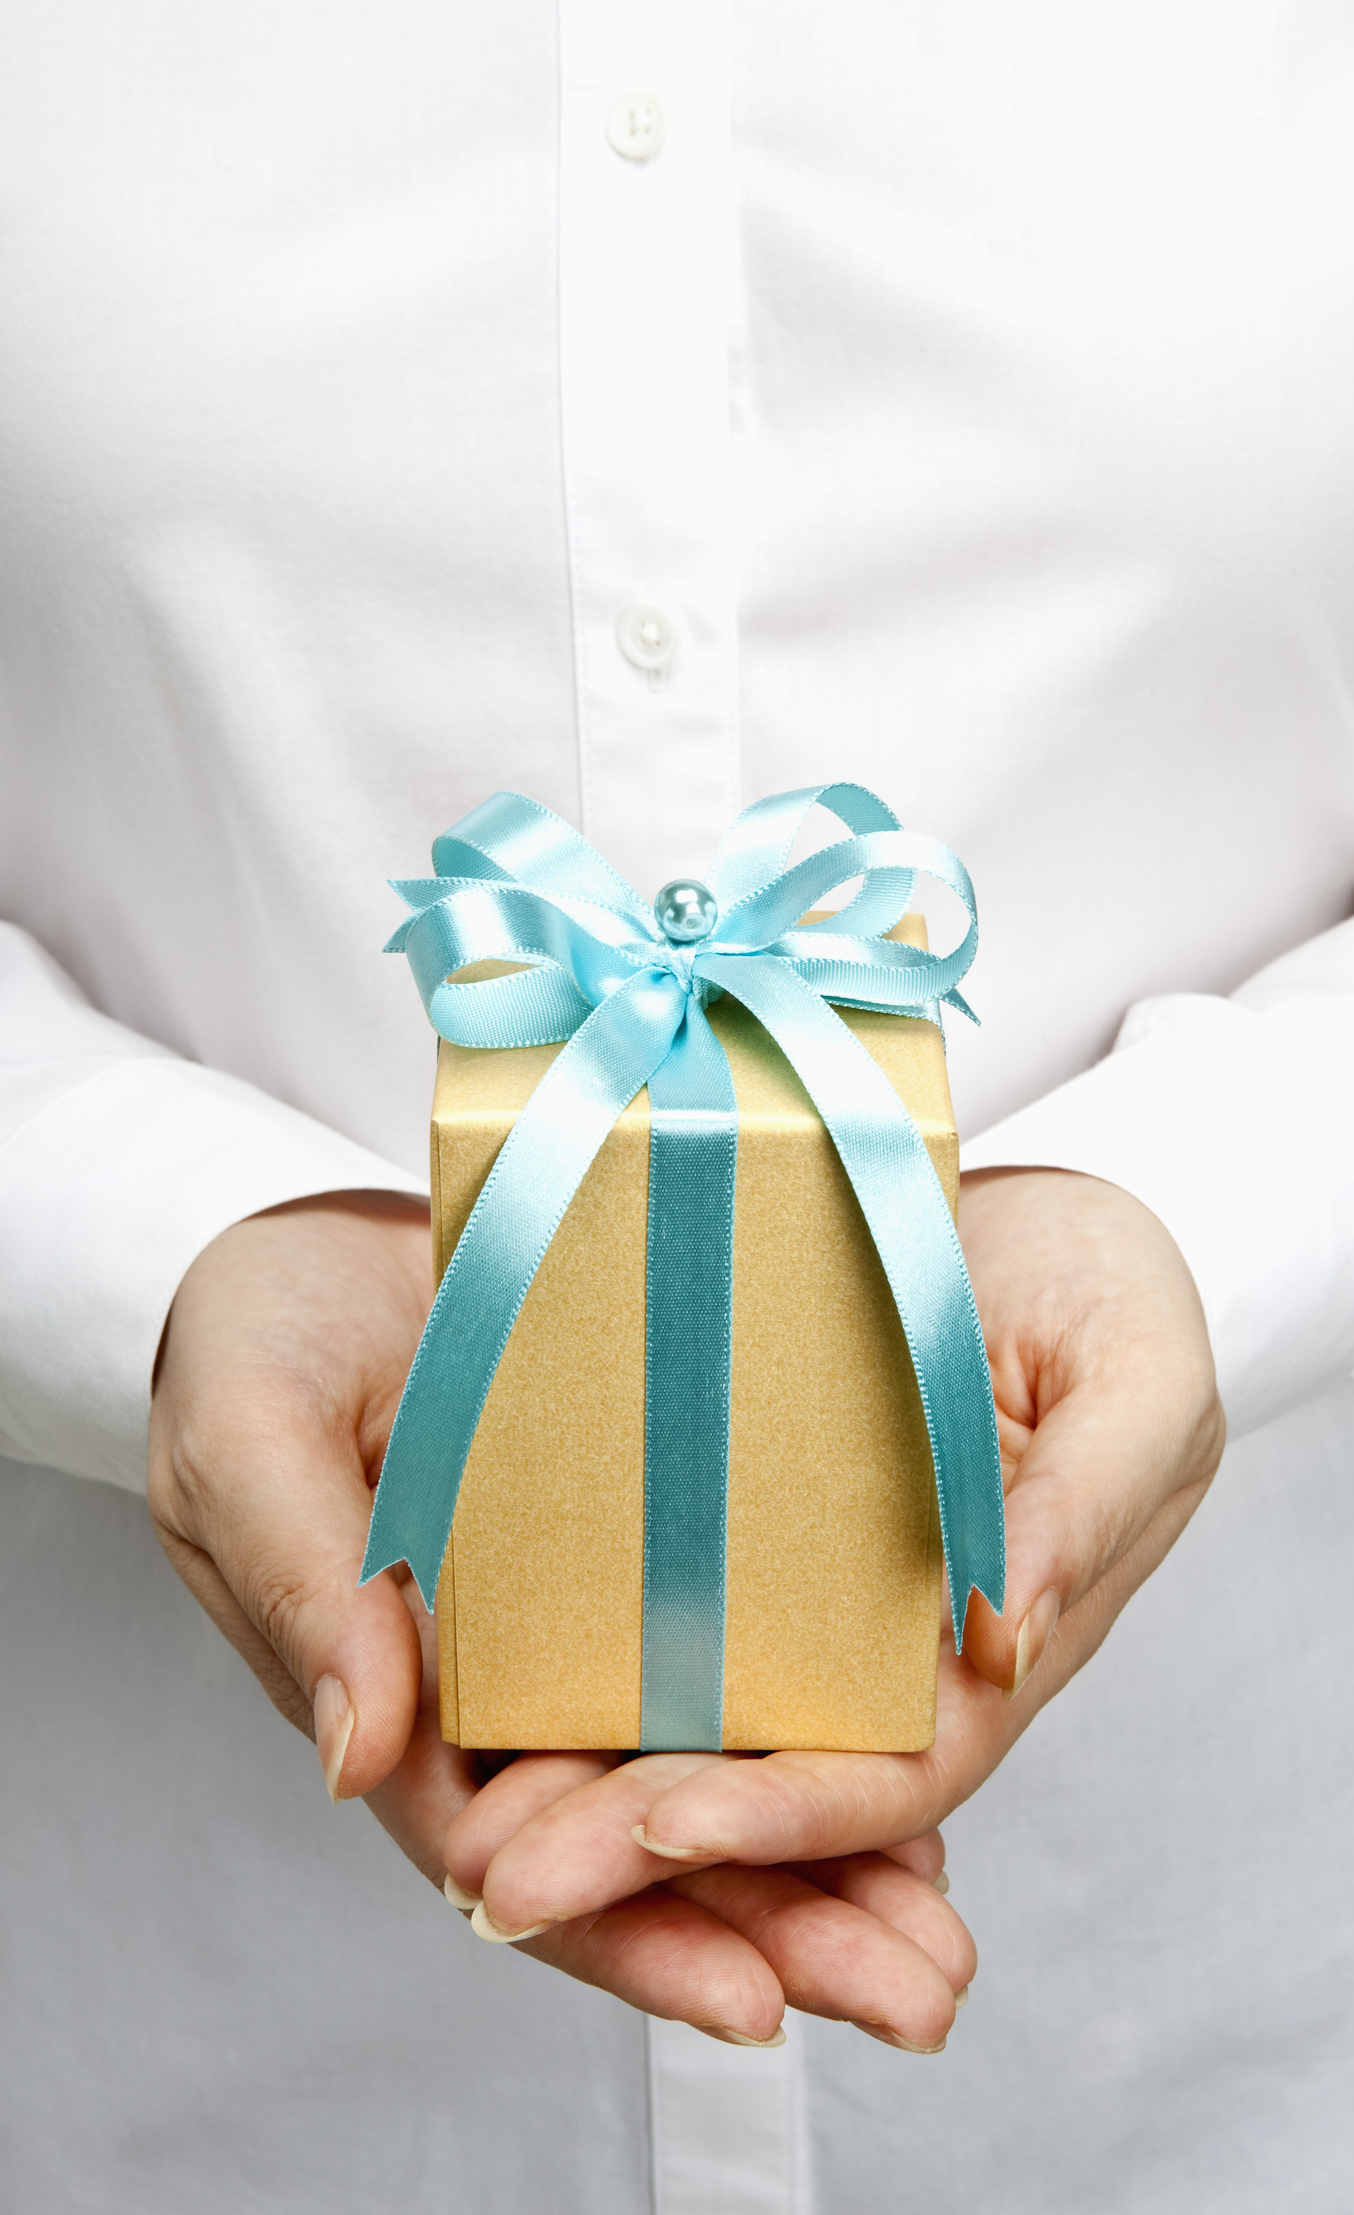 Hands extended with small gift